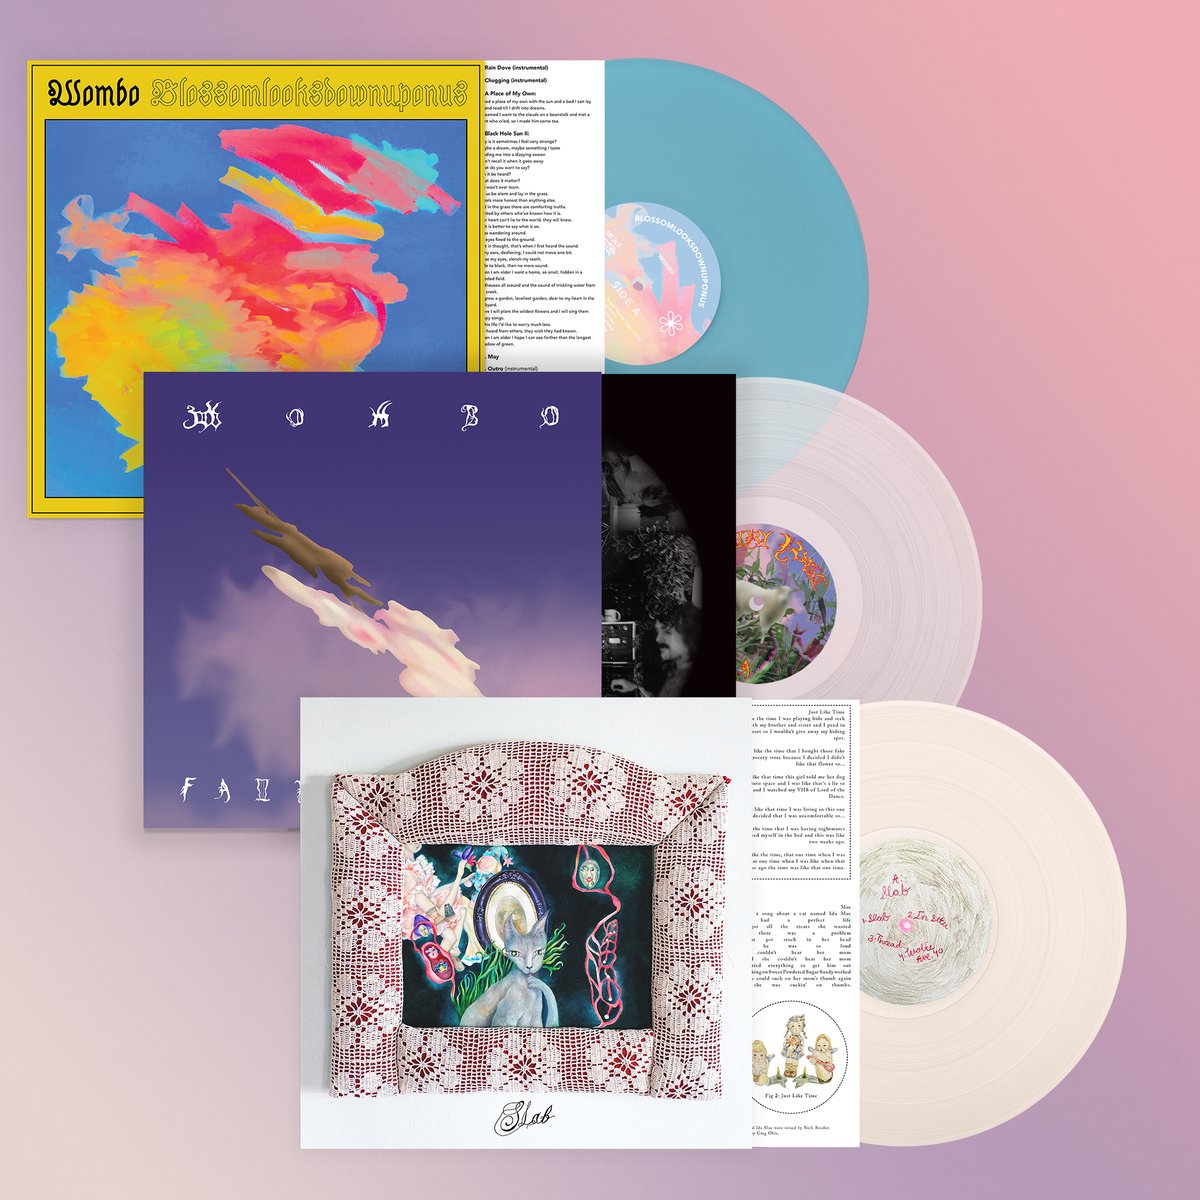 It's @Bandcamp Friday & we've dropped the full @womborocks package 📦 Now pick up the 'Slab' & 'Dreamsickle' EPs pressed to one LP on limited cloudy clear vinyl + new variants just landed of 'Blossom' & 'Fairy Rust' + get all 3 bundled ! 🛒 -> womborocks.bandcamp.com/merch